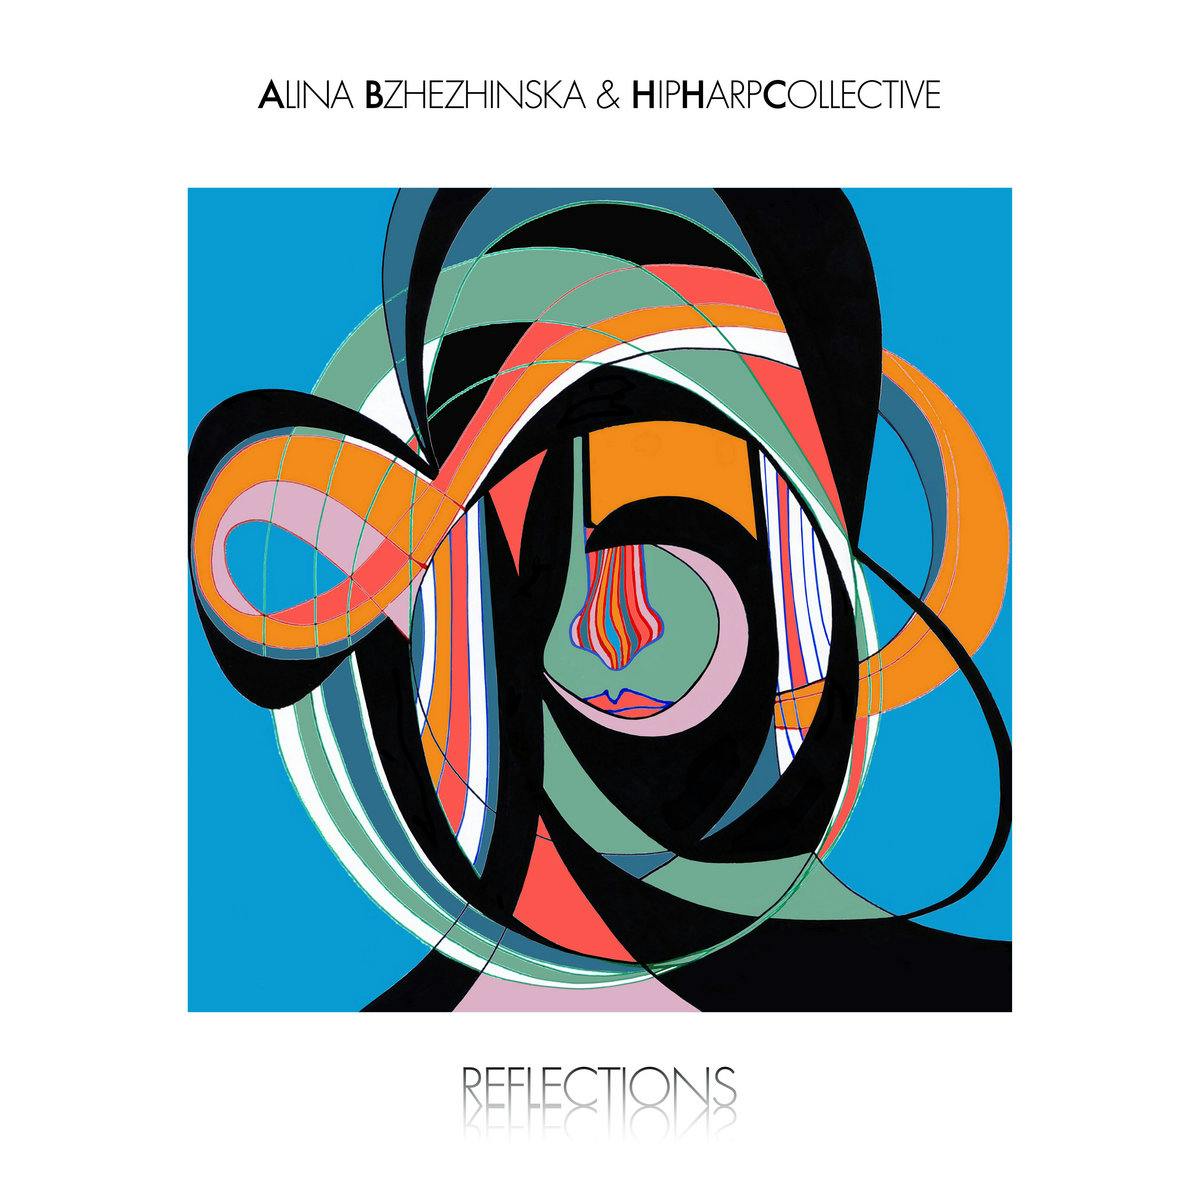 Issued on BBE Music, “Reflections” is the new album by London-based harp player and composer Alina Bzhezhinska, alongside her HipHarpCollective.